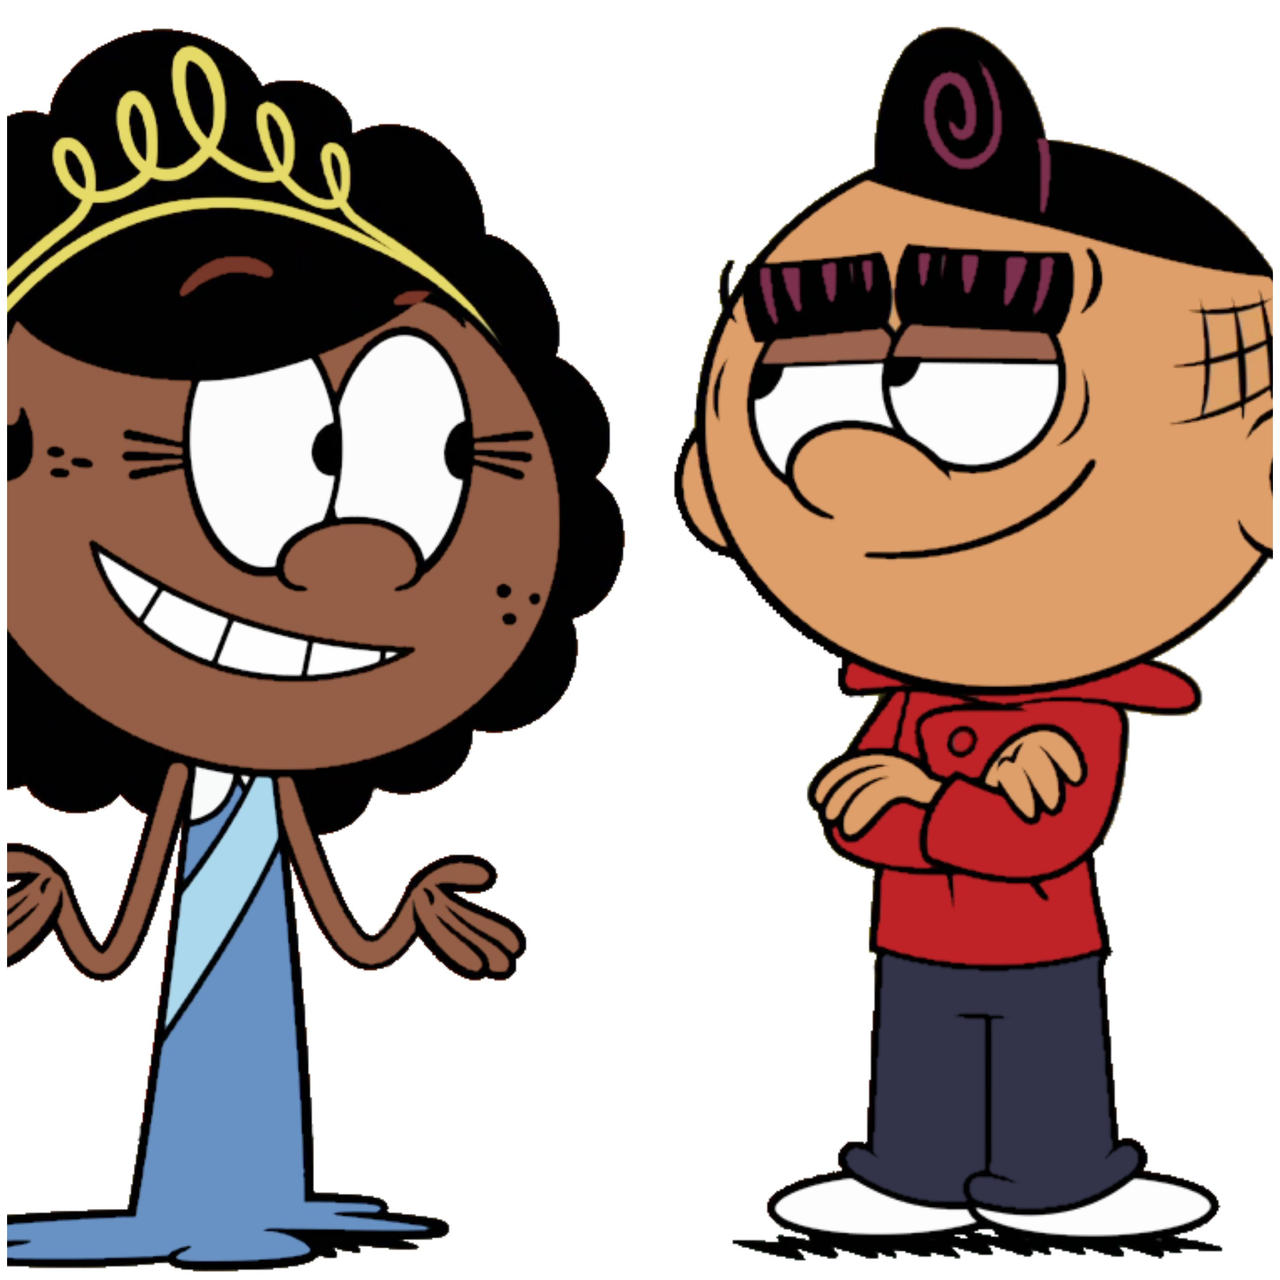 Cricket and Carl (The Loud House) by EBOTIZER on DeviantArt